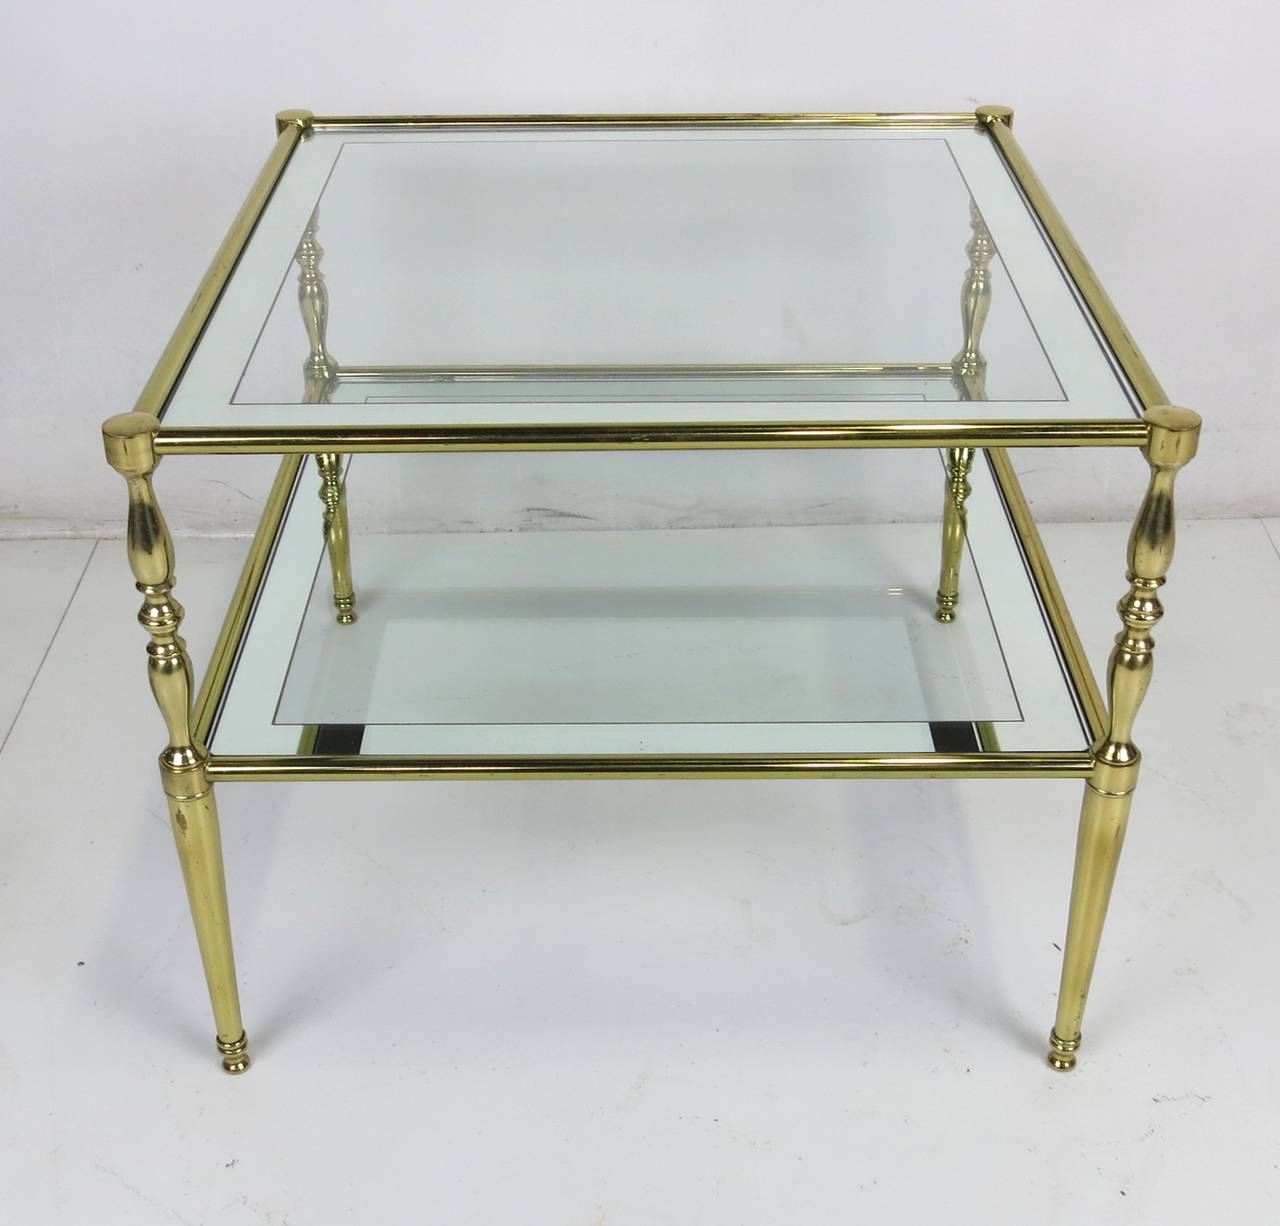 Solid brass Side Table with Mirrored Edge Glass Top in the Chiavari style.